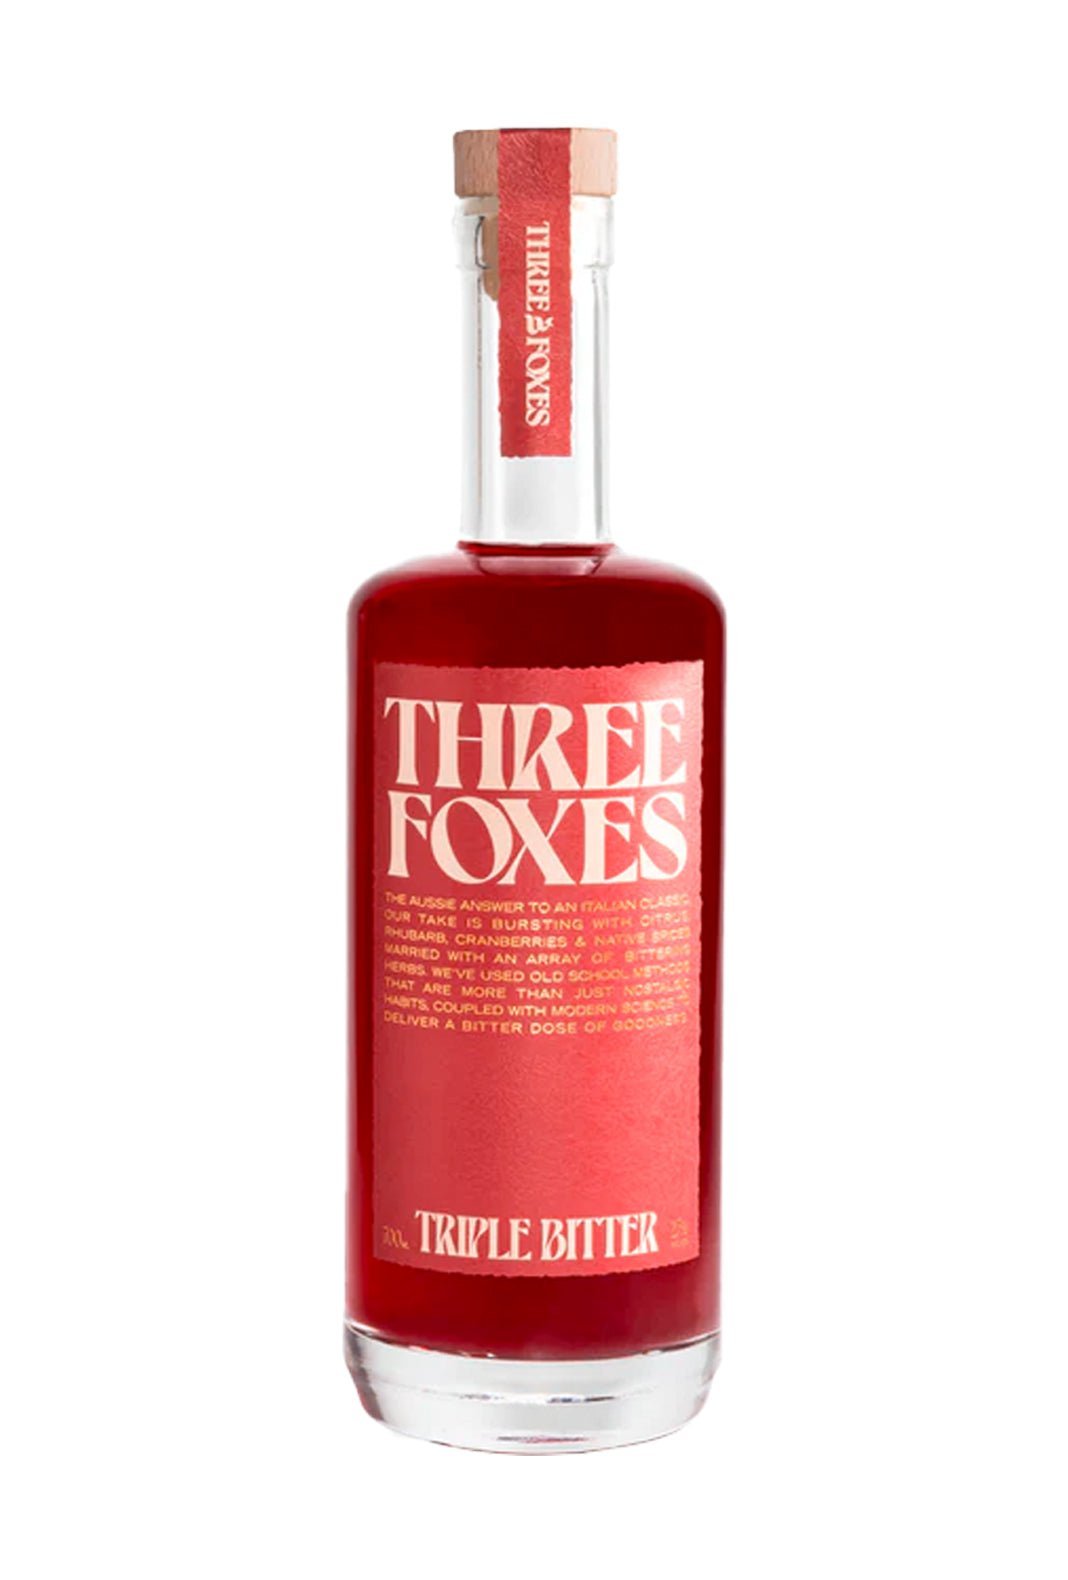 Three Foxes Triple Bitter 27% 700ml | | Shop online at Spirits of France